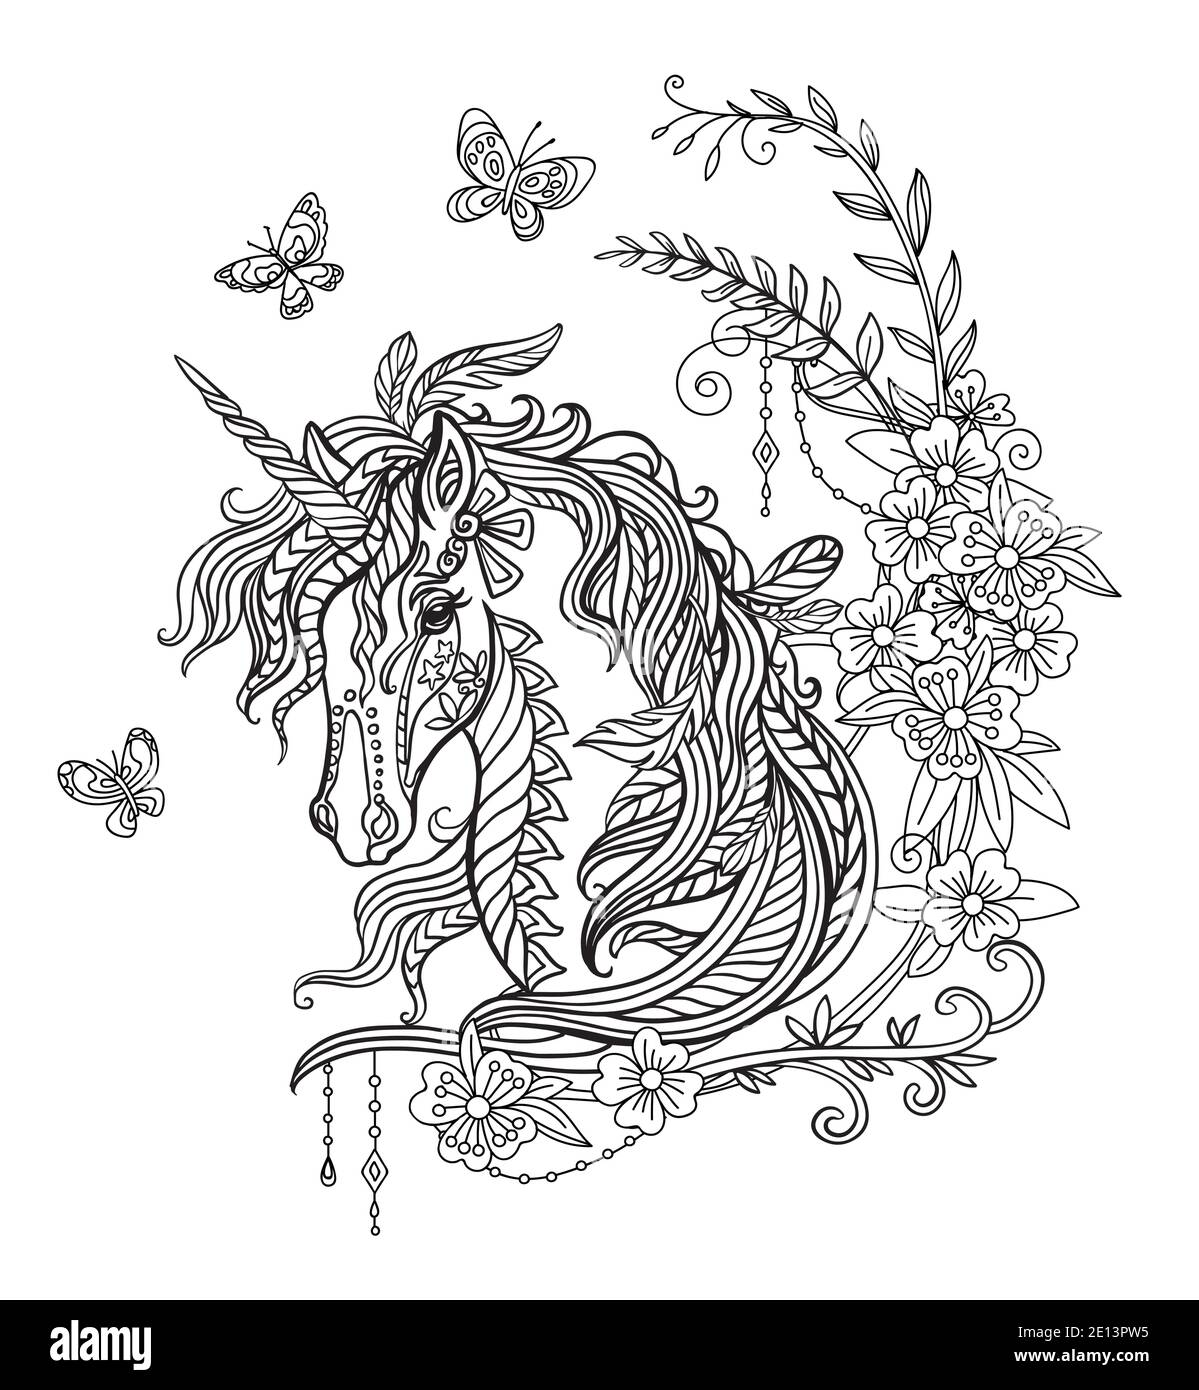 Drawing isolated portrait of unicorn with long mane tangle style for adult coloring book, tattoo, t-shirt design, logo, sign. Stylized illustration of Stock Vector